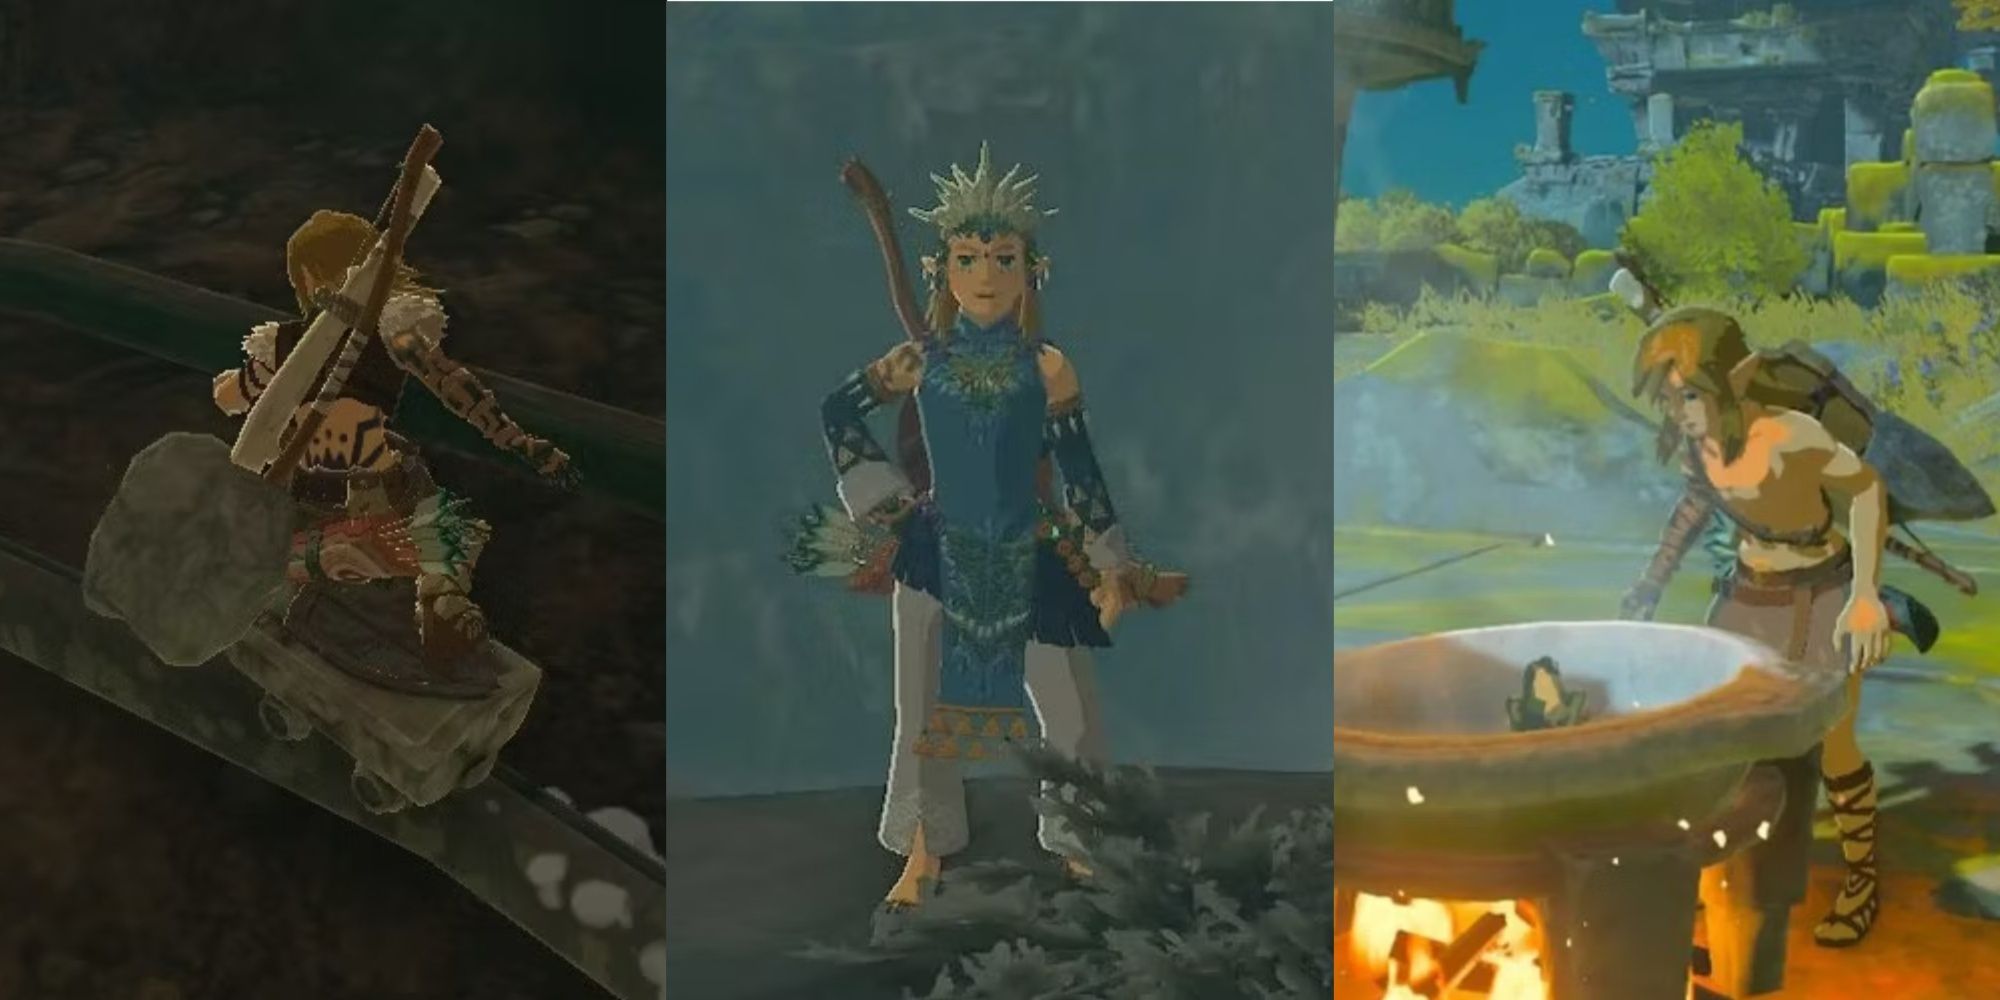 Link skating on a rail, Link wearing the Frostbite armor, Link cooking in Tears of the Kingdom